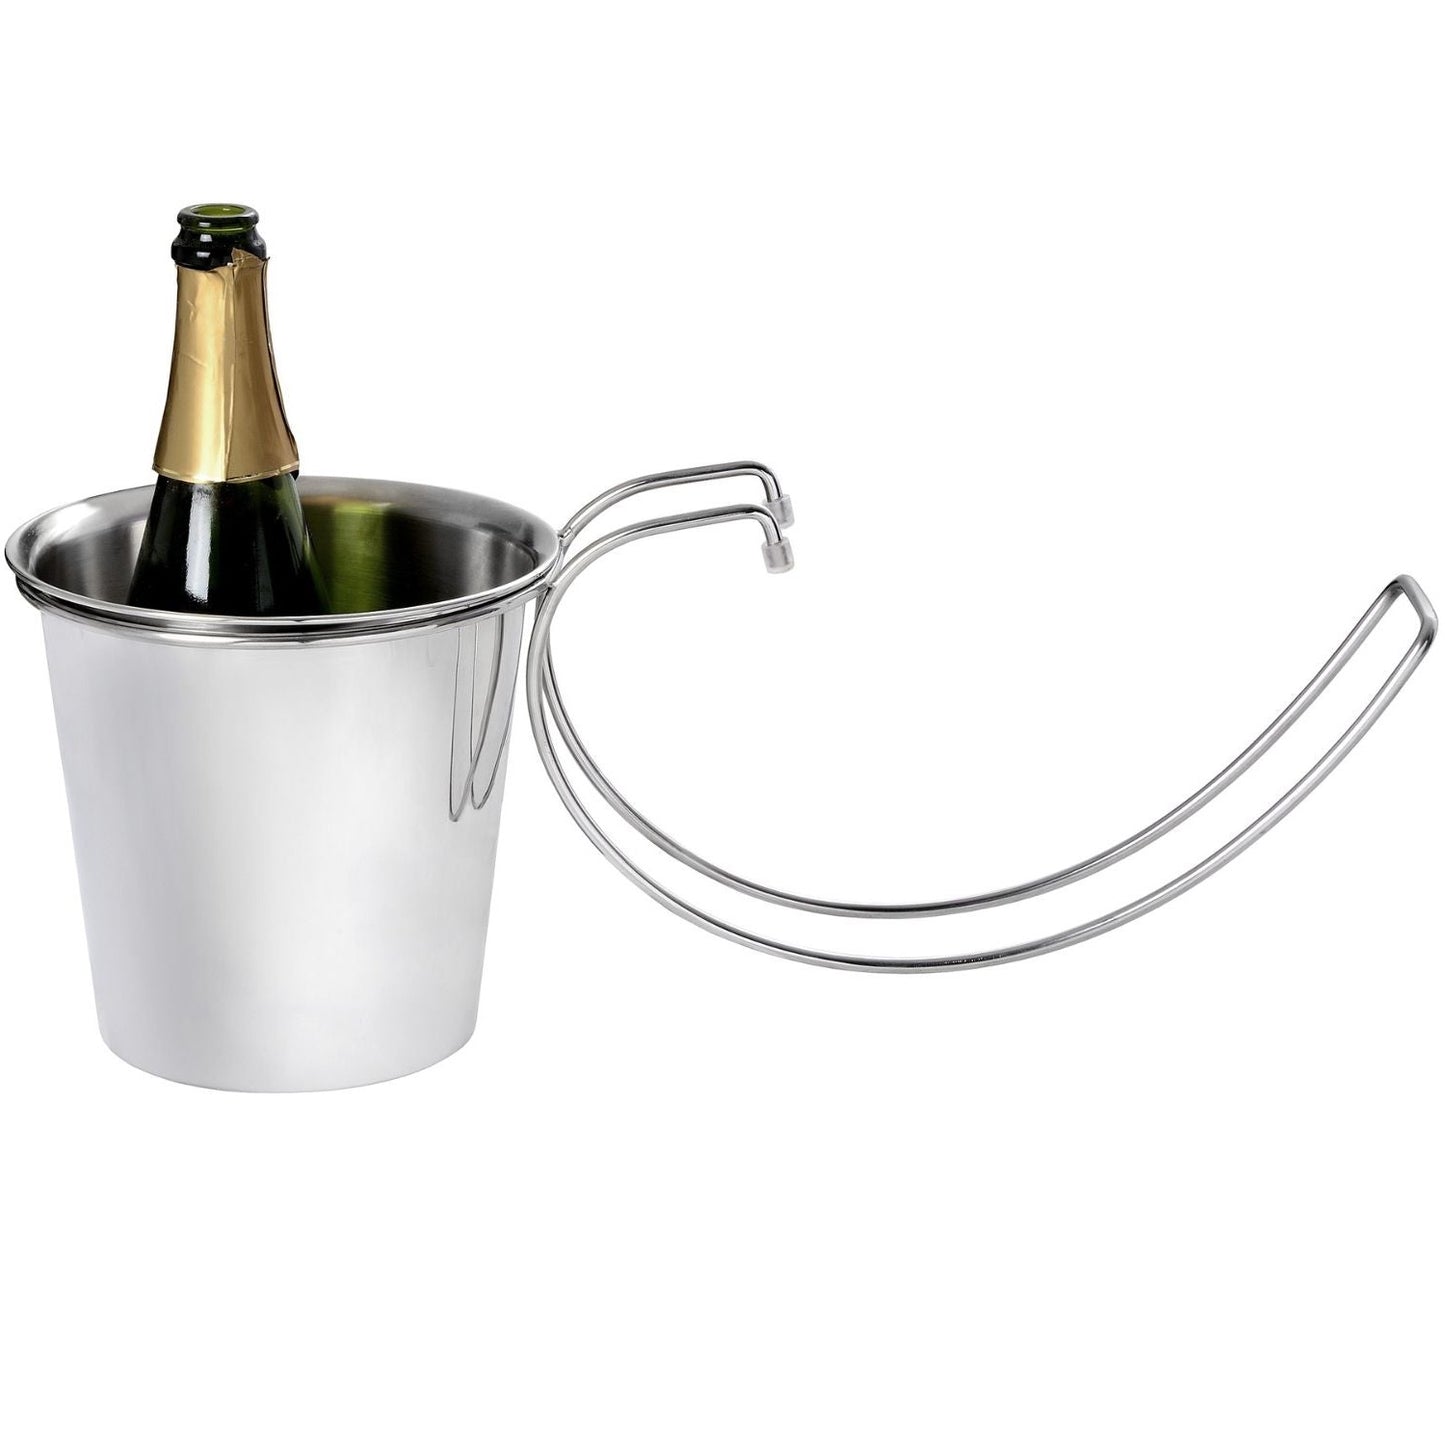 Silver champagne and wine cooler hanging bucket